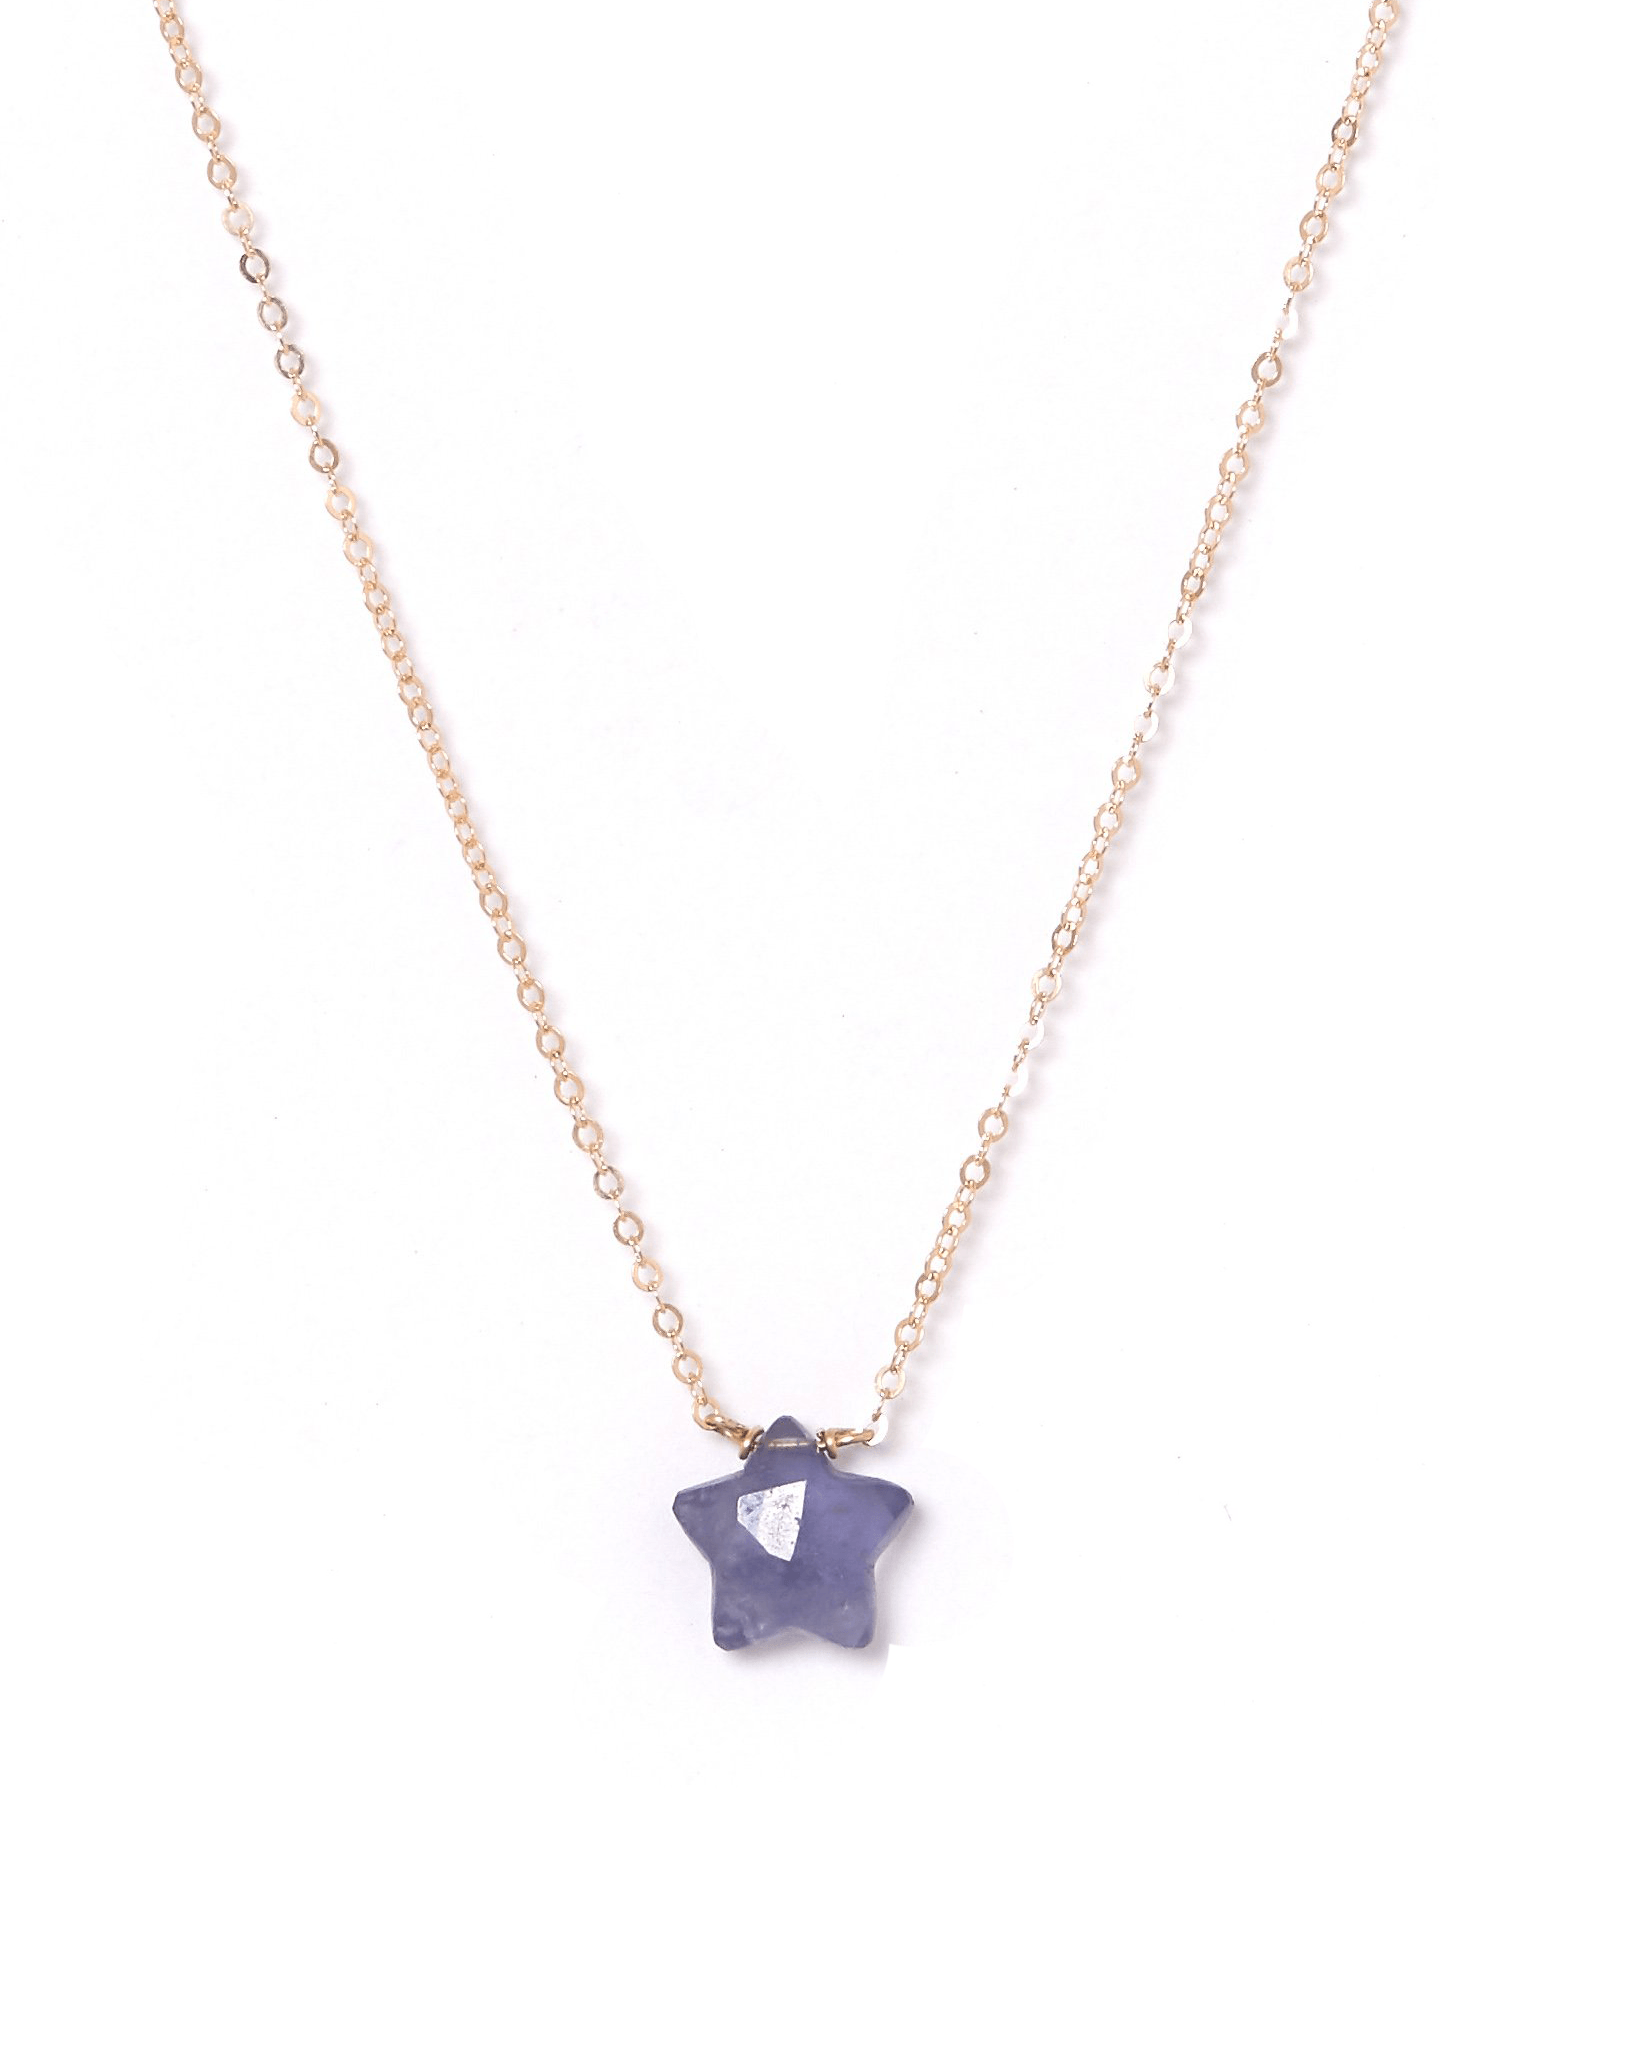 Star Necklace by KOZAKH. A 16 to 18 inch adjustable length necklace, crafted in 14K Gold Filled, featuring an Iolite star charm.